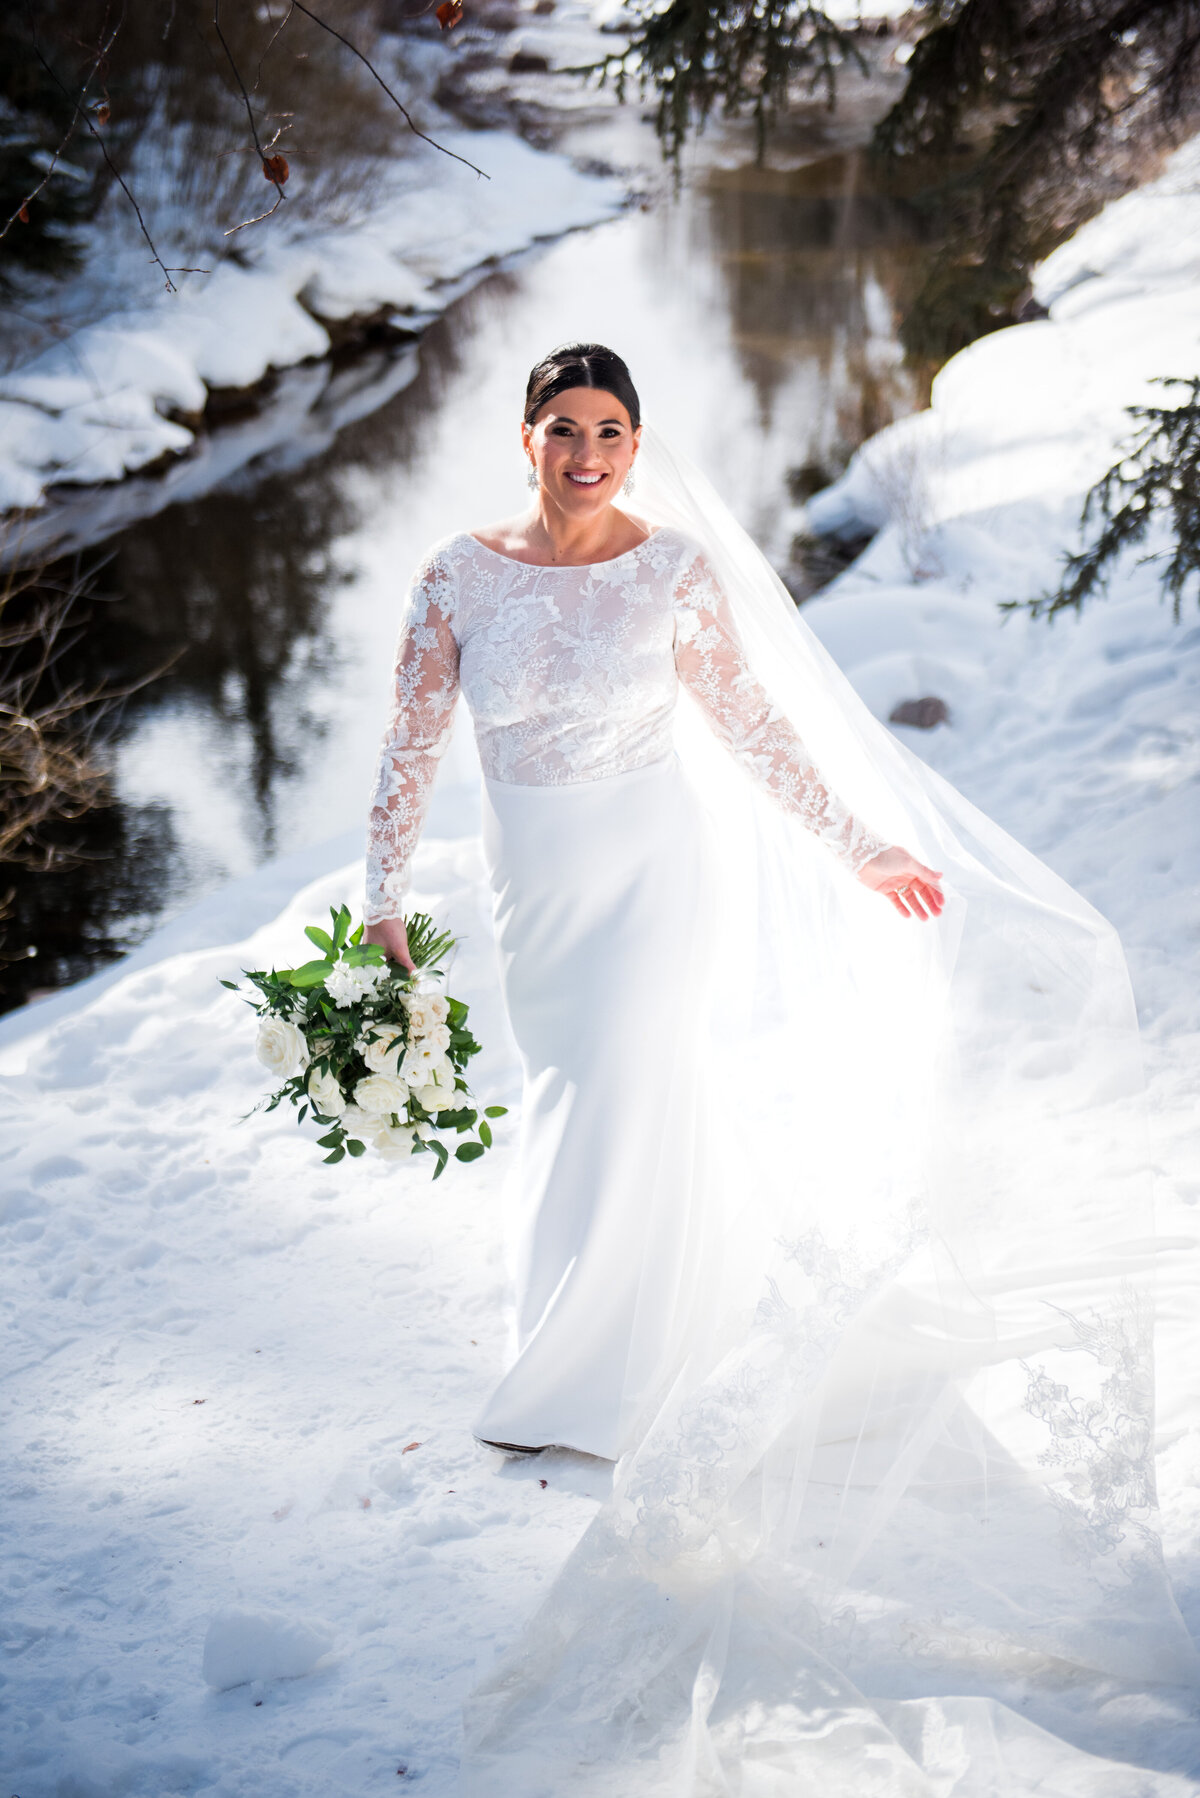 A bride smiles at the camera and playfully twirls her veil in snowy Vail, Colorado.